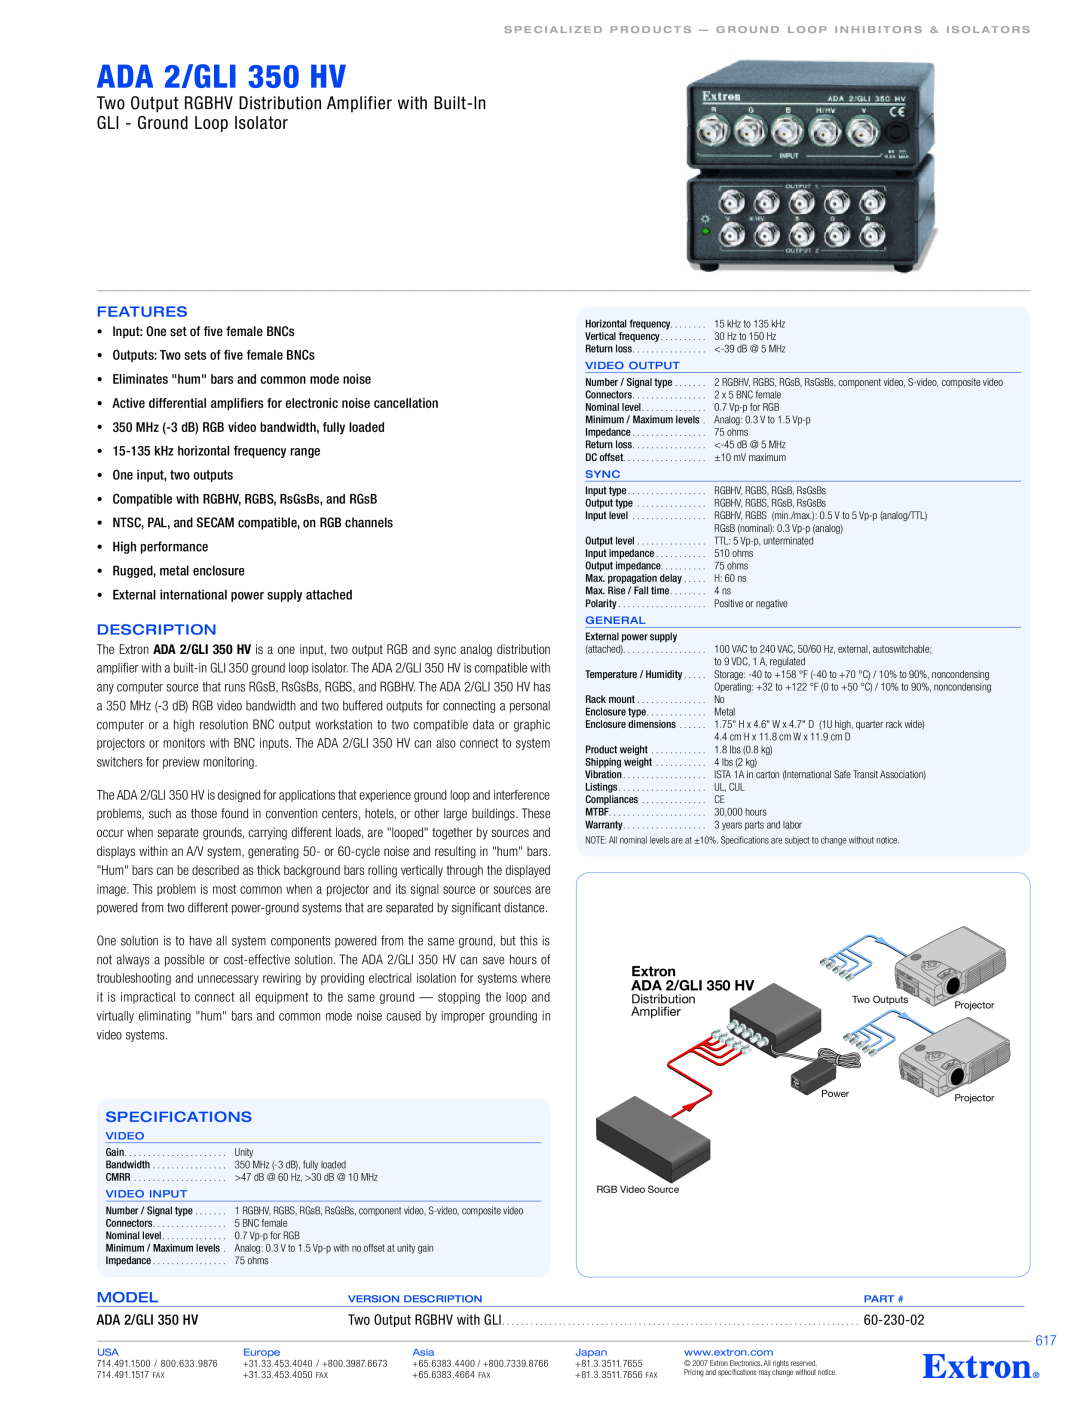 Extron electronic ADA 2/GLI 350 HV specifications GLI - Ground Loop Isolator, Features, Description, Specifications, Model 